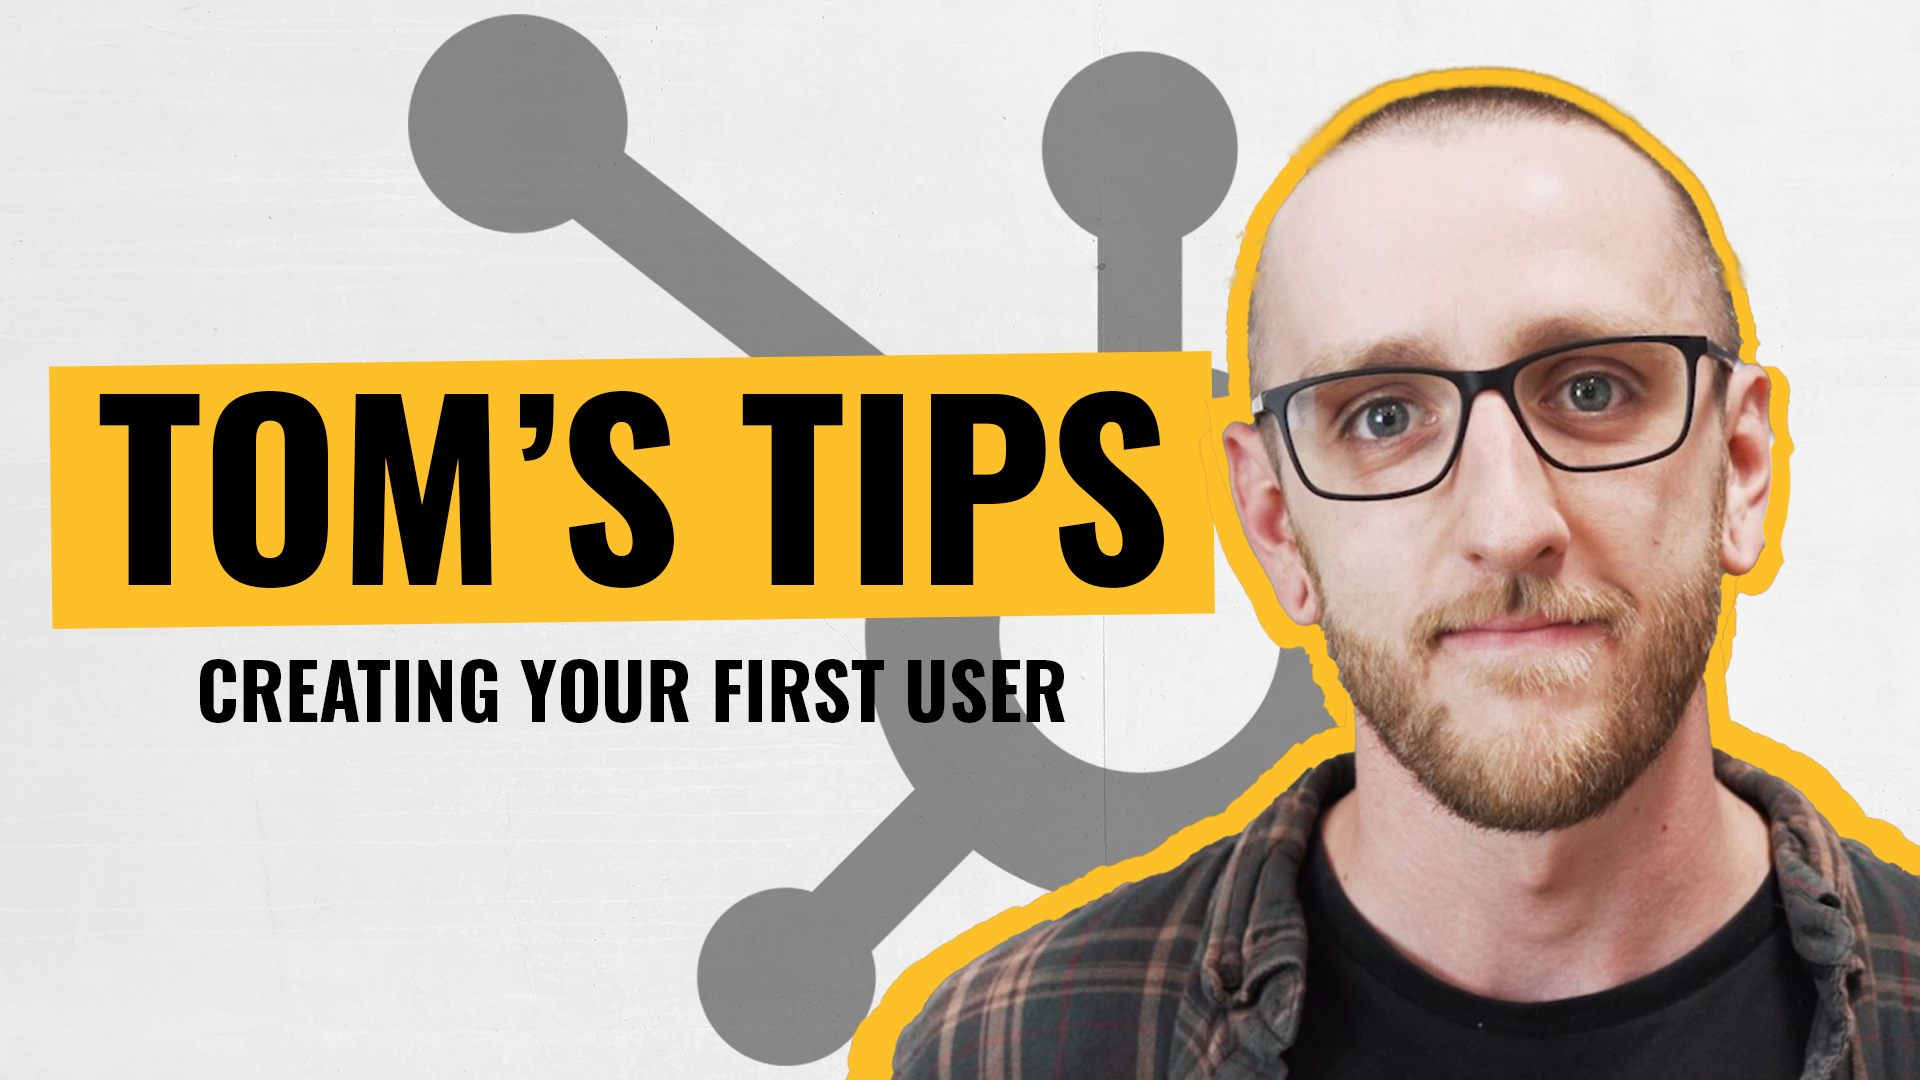 [Video] Tom's Tips - S1 E2- How do I create users on HubSpot?